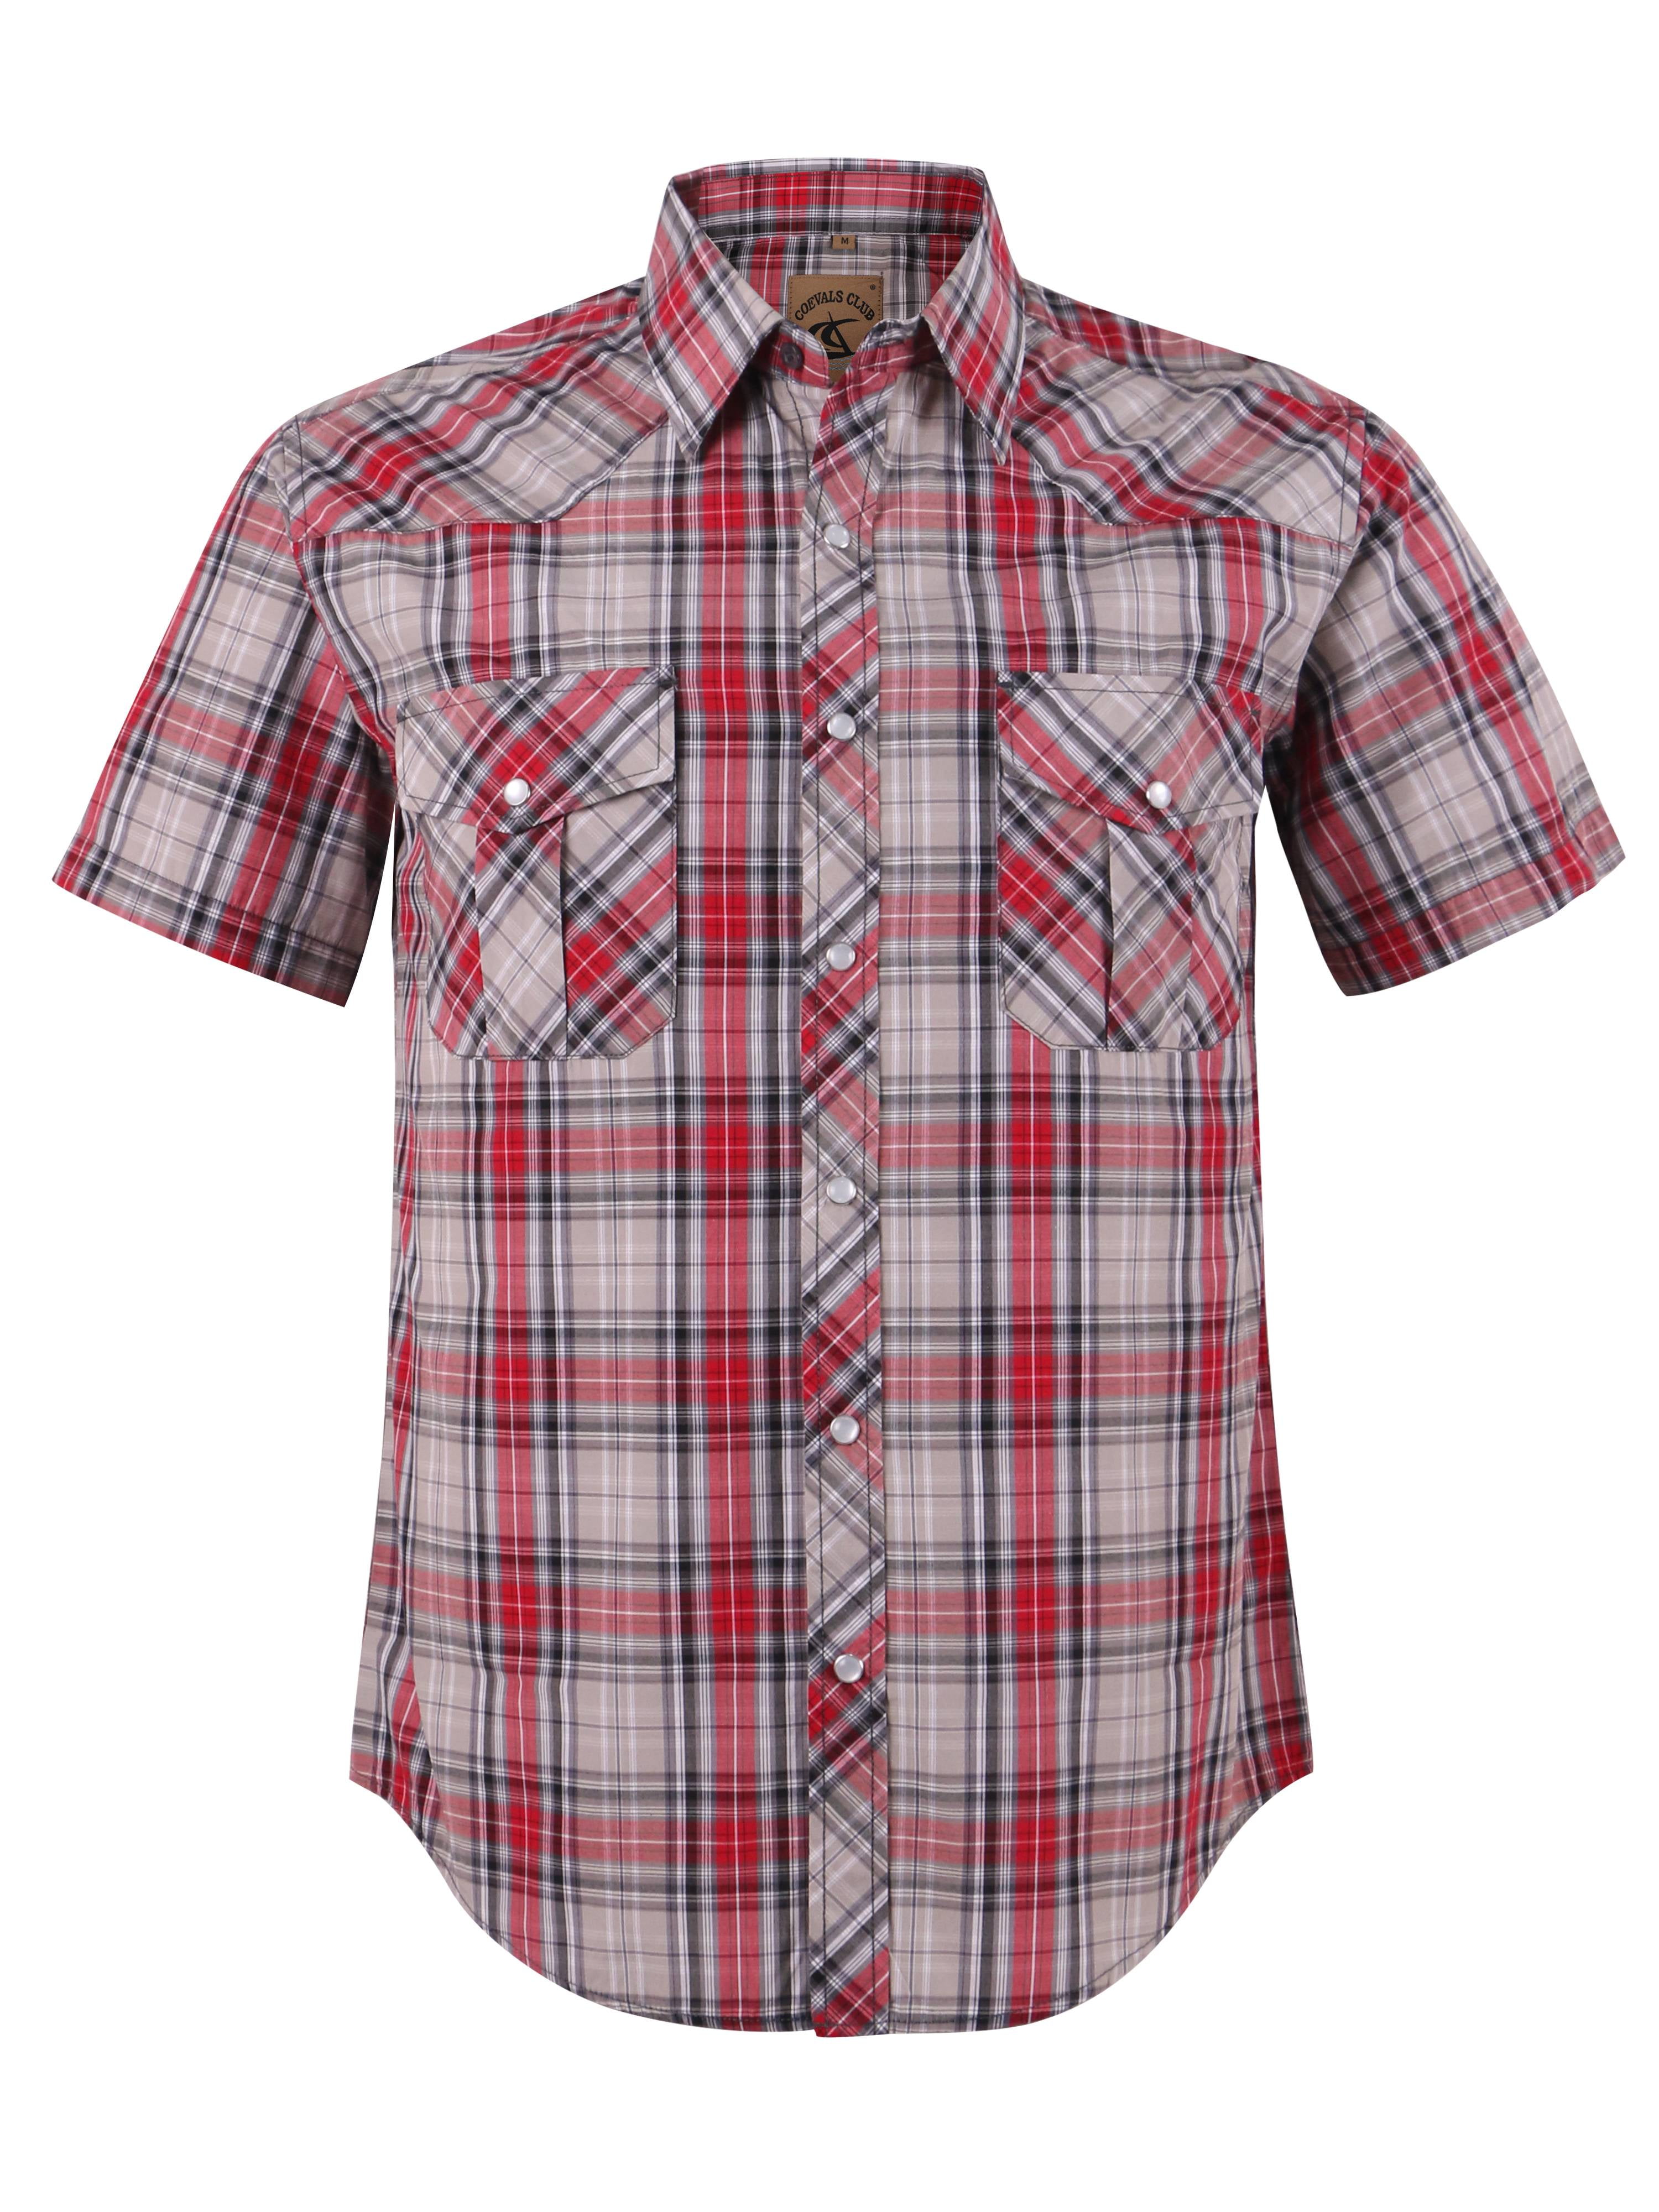 Coevals Club Men's Western Plaid Pearl Snap Short Sleeve Shirts (Red ...